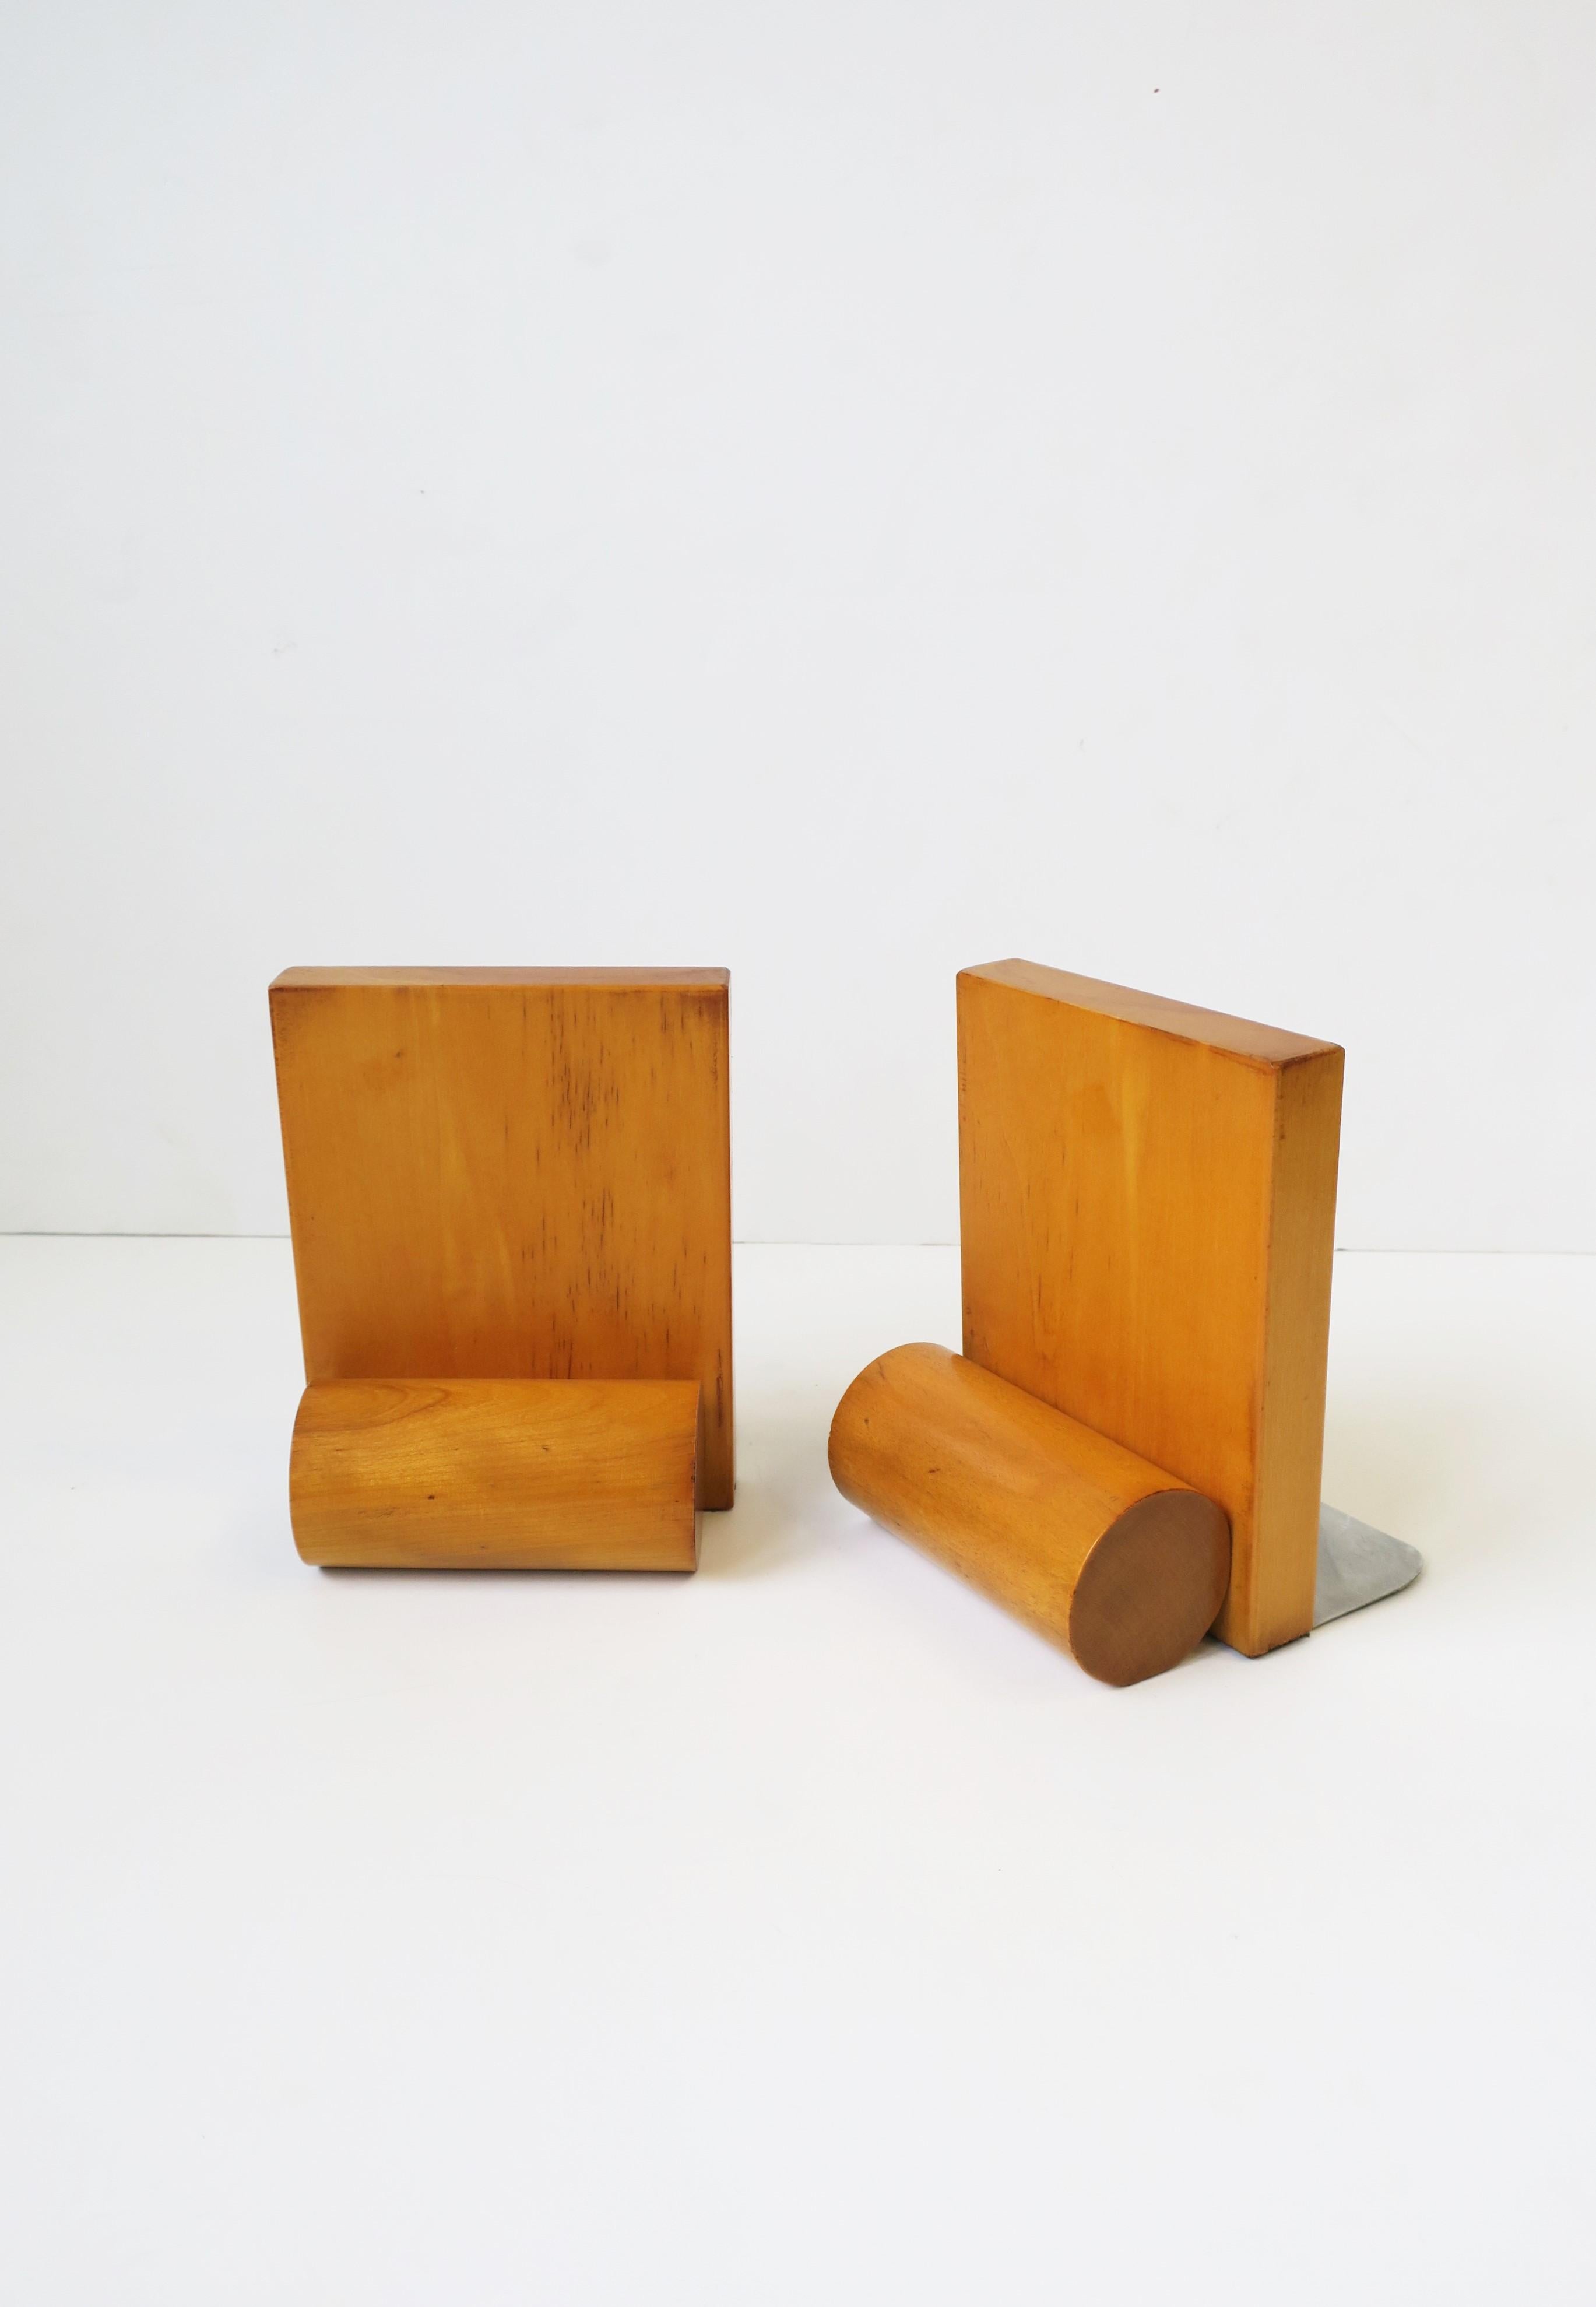 Varnished Art Deco Modern Bookends, Pair For Sale